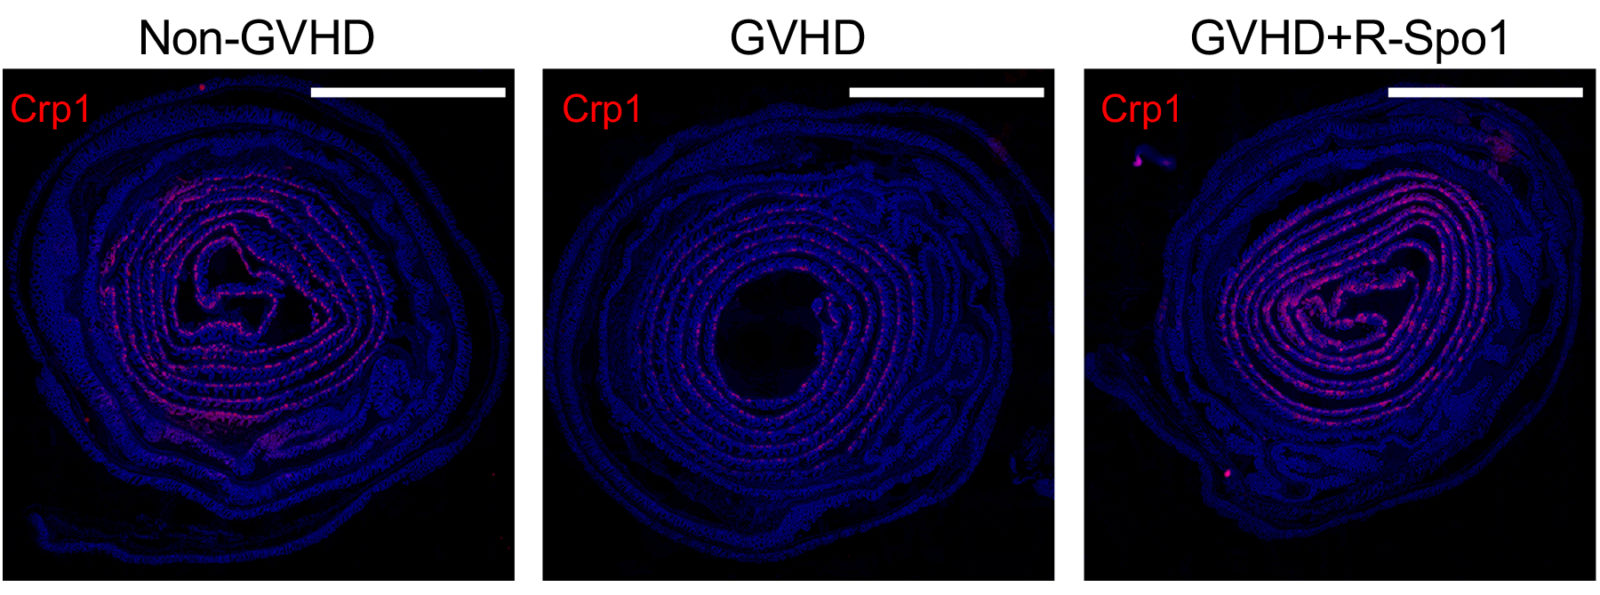 R-Spondin1 protects Paneth cells against GVHD and ameliorates intestinal dysbiosis. The images show rolled intestines after hematopoietic stem cell transplantation with (right) or without (middle) R-Spondin1. (Hayase E. et al., Journal of Experimental Medicine, October 24, 2017)